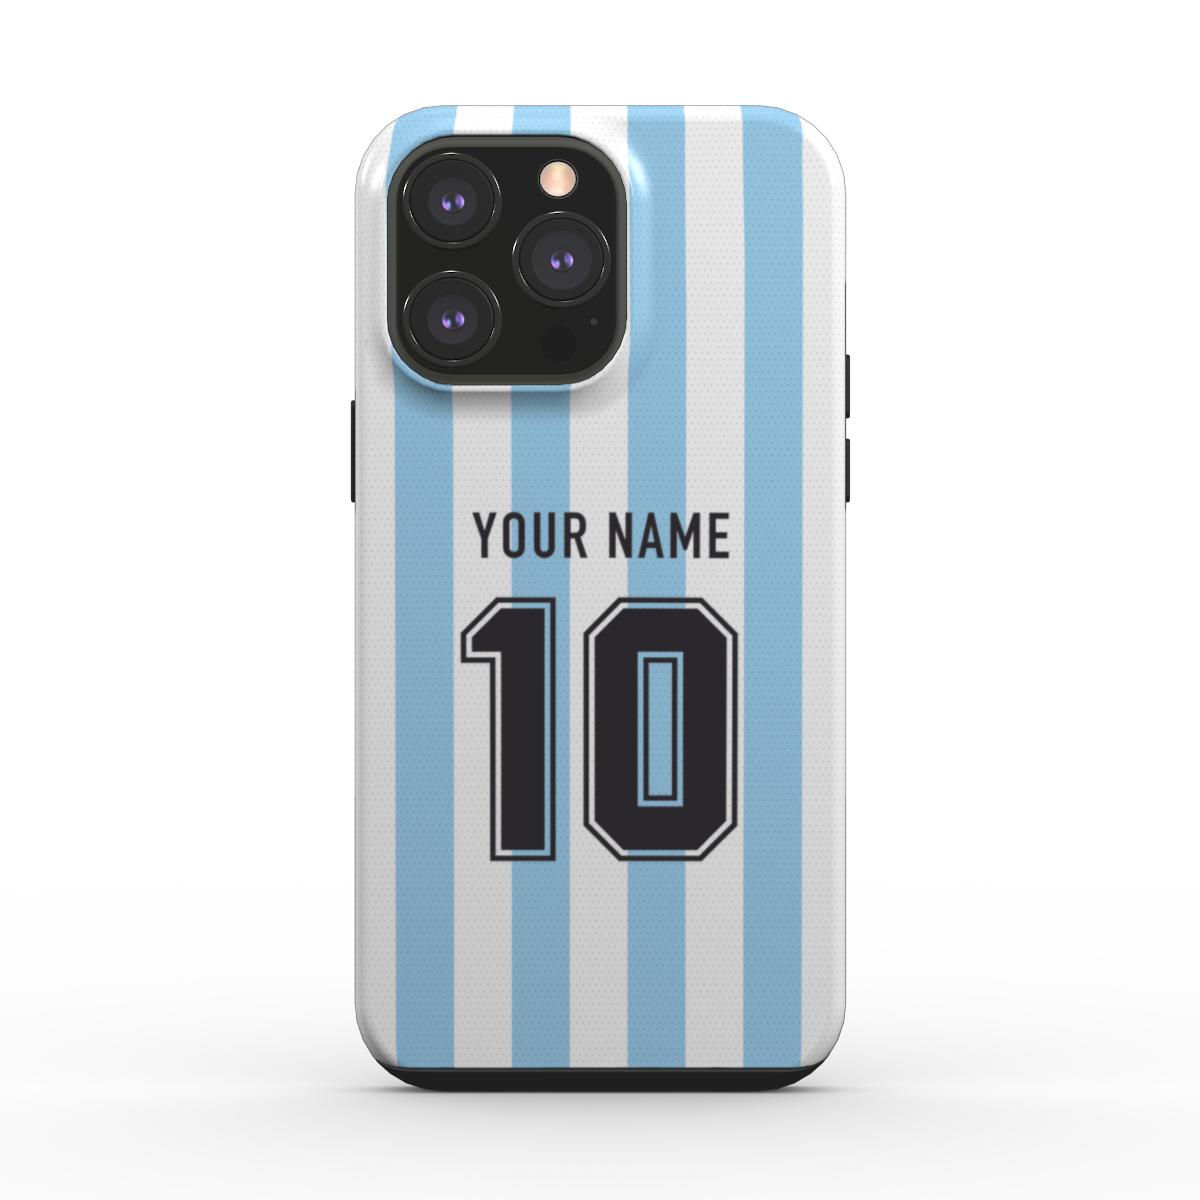 Argentina - 1986 - Home Kit - Personalised Dual Layer Phone Case